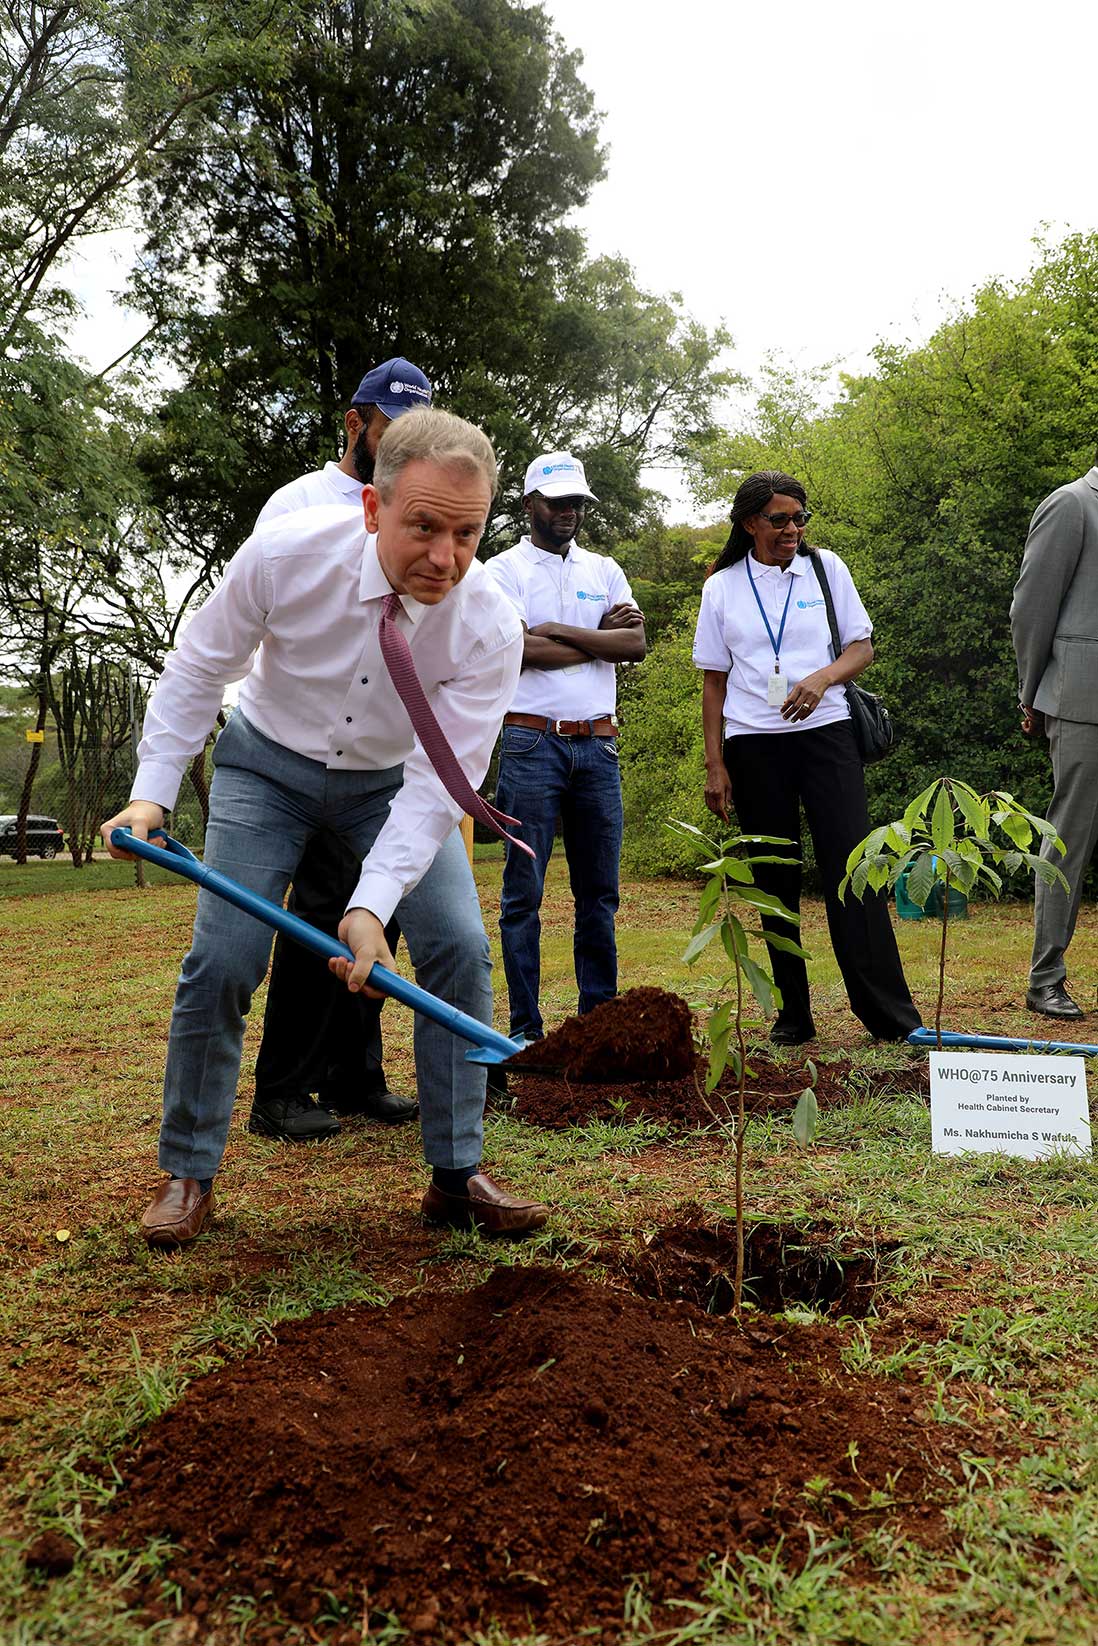 Stephen is seen planting a tree